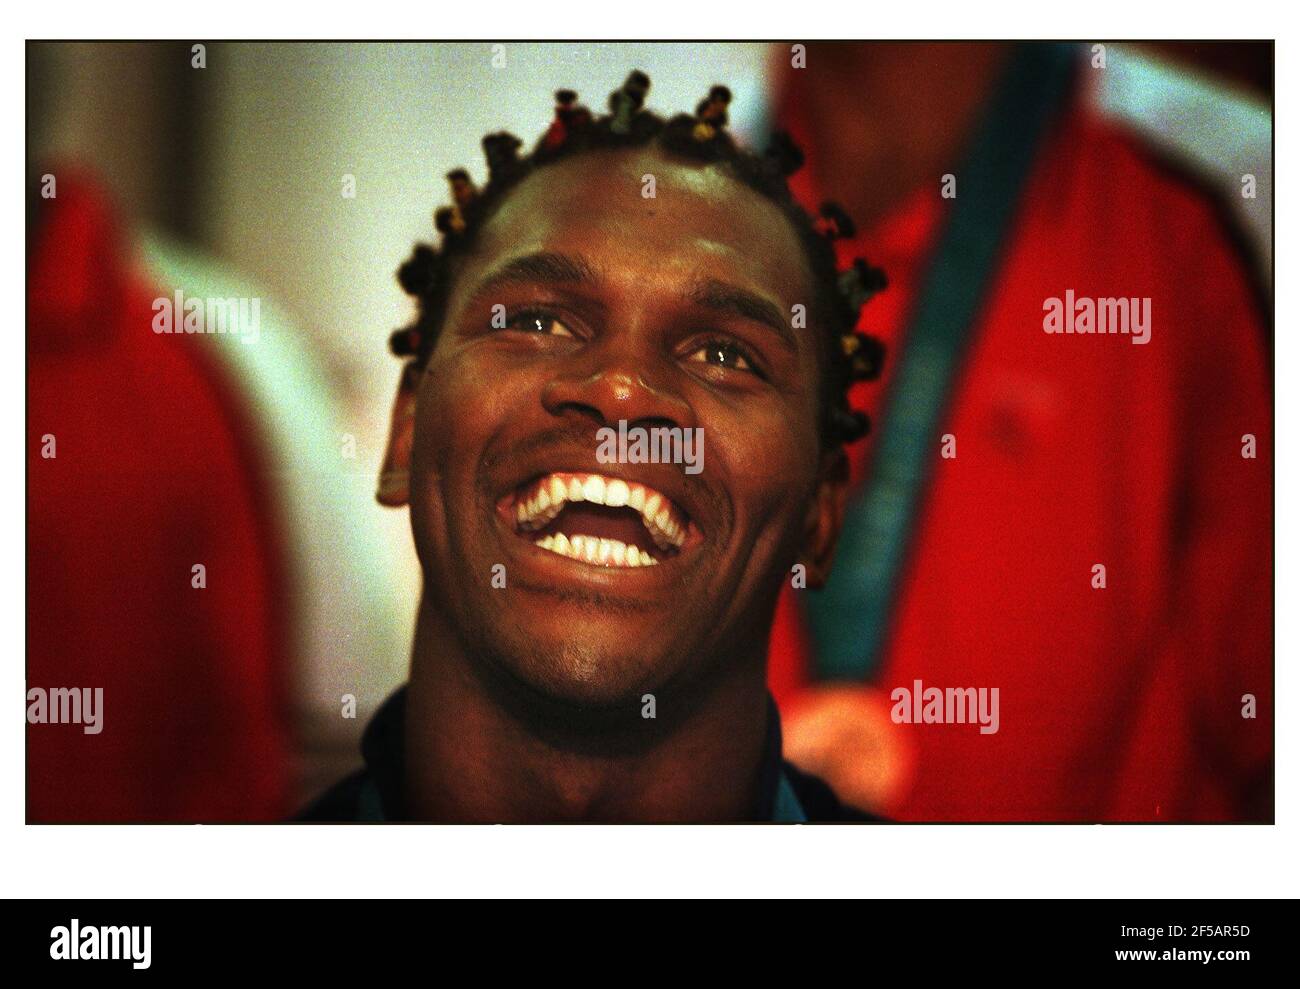 British Olympic Medalists arrive home at Heathrow airport....Audley Harrison Super Heavyweight Boxing. Pic David Sandison 3/10/2000 Stock Photo